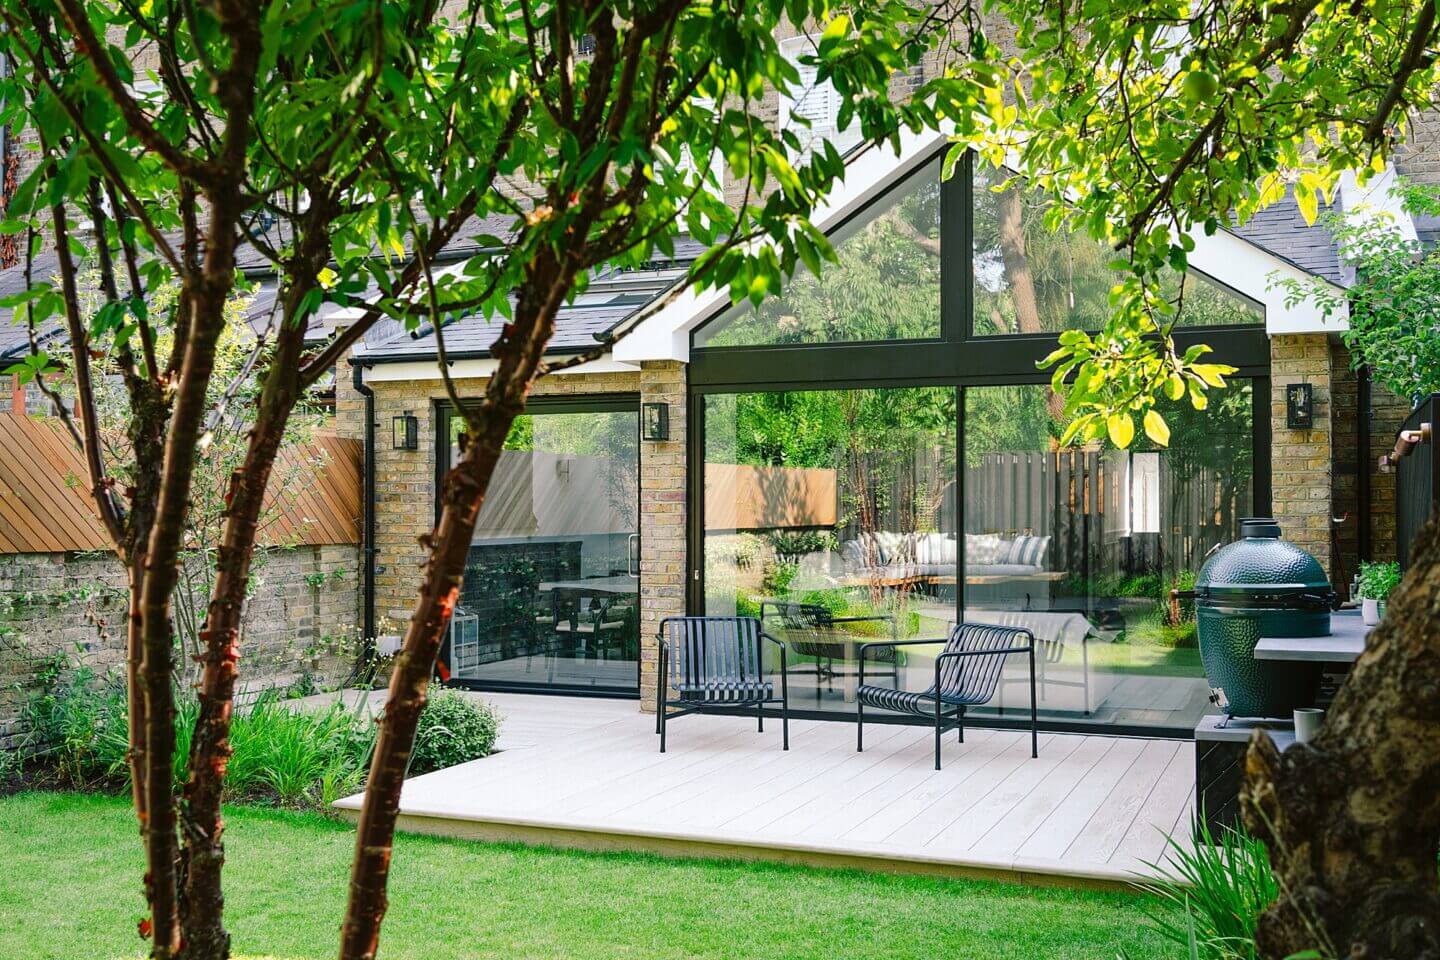 garden design with patio area and seating viewed through trees